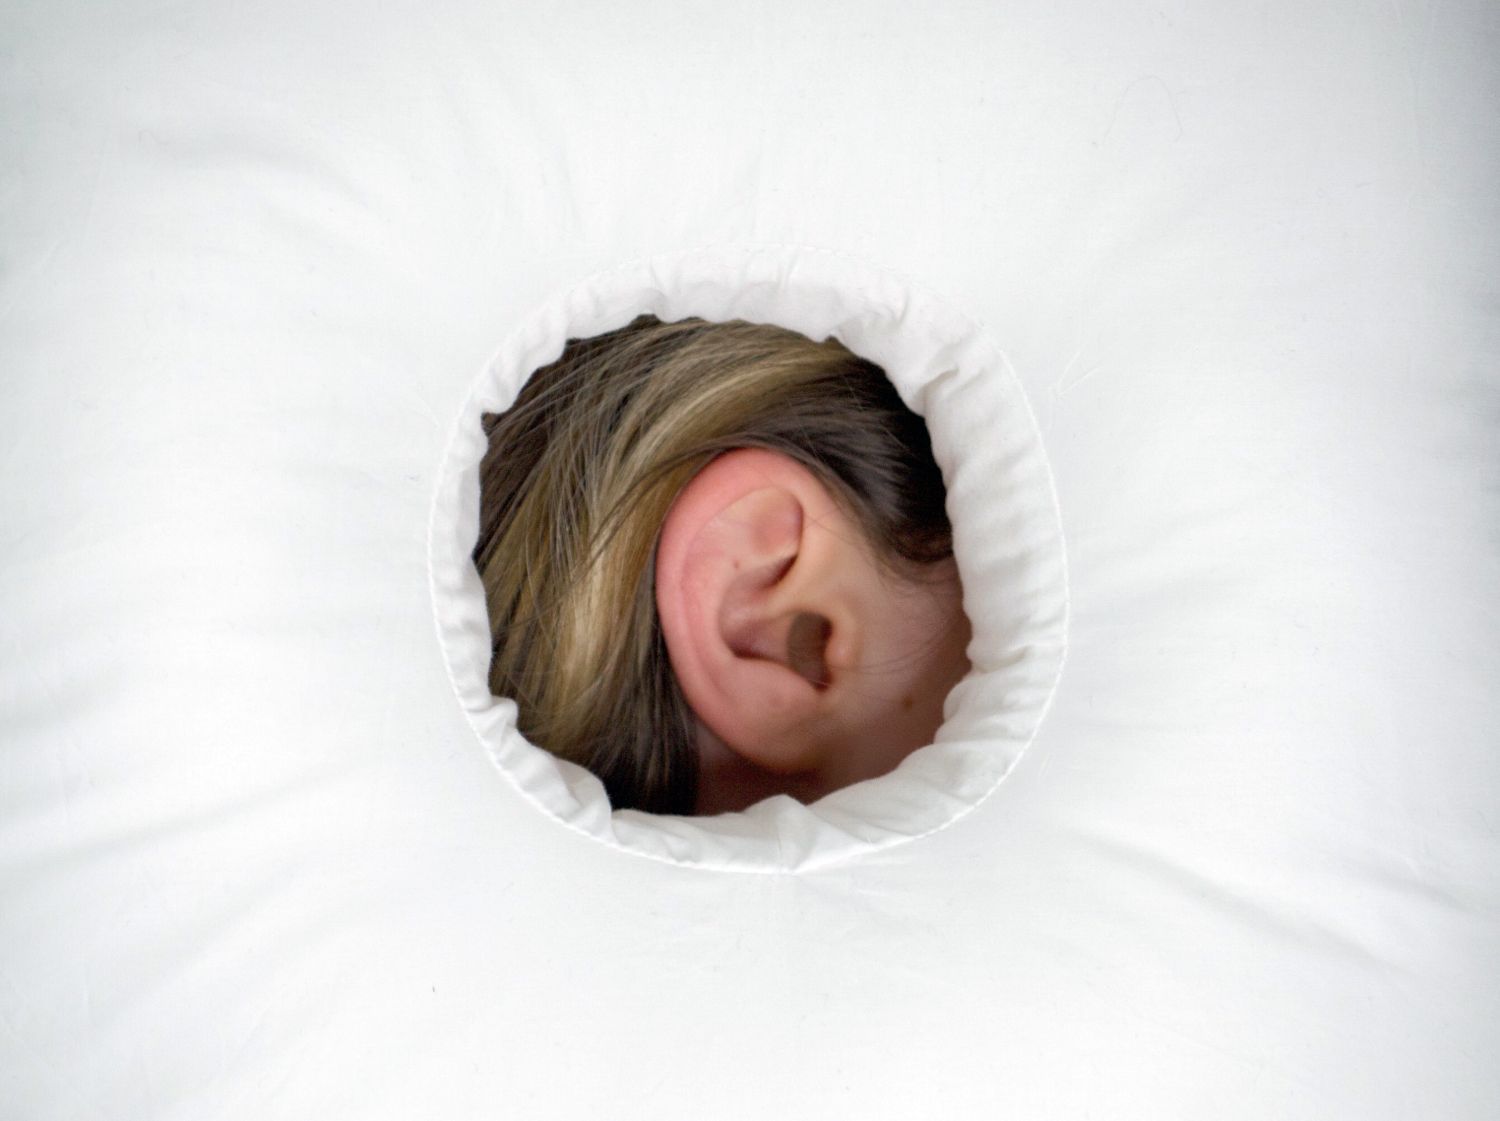 Buy Ear Pillow With Center Hole - Say Goodbye to Ear Pain